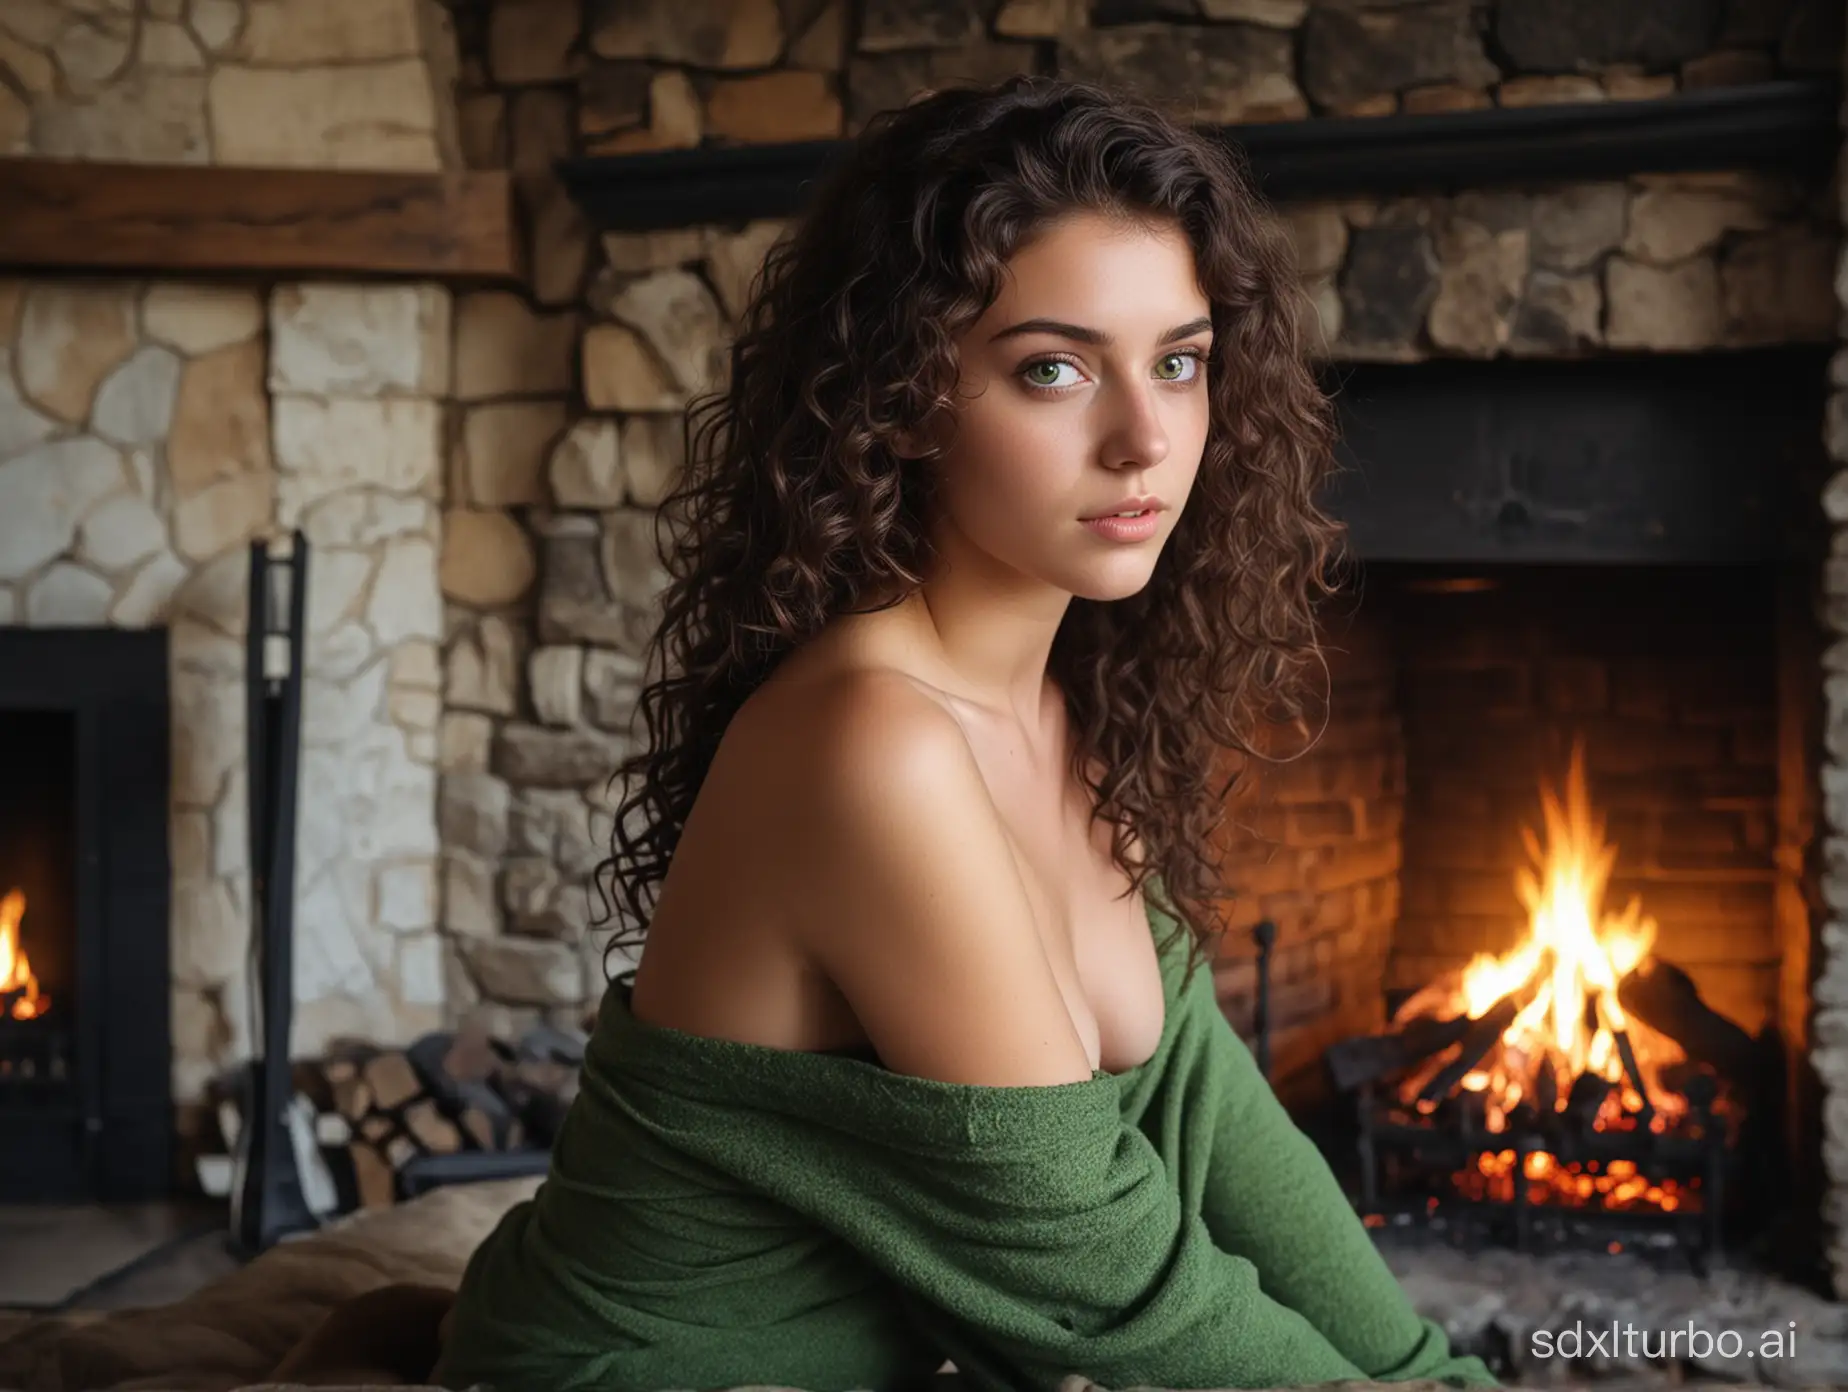 Dreamy-Atmosphere-22YearOld-Girl-with-Green-Eyes-by-an-Old-Fireplace